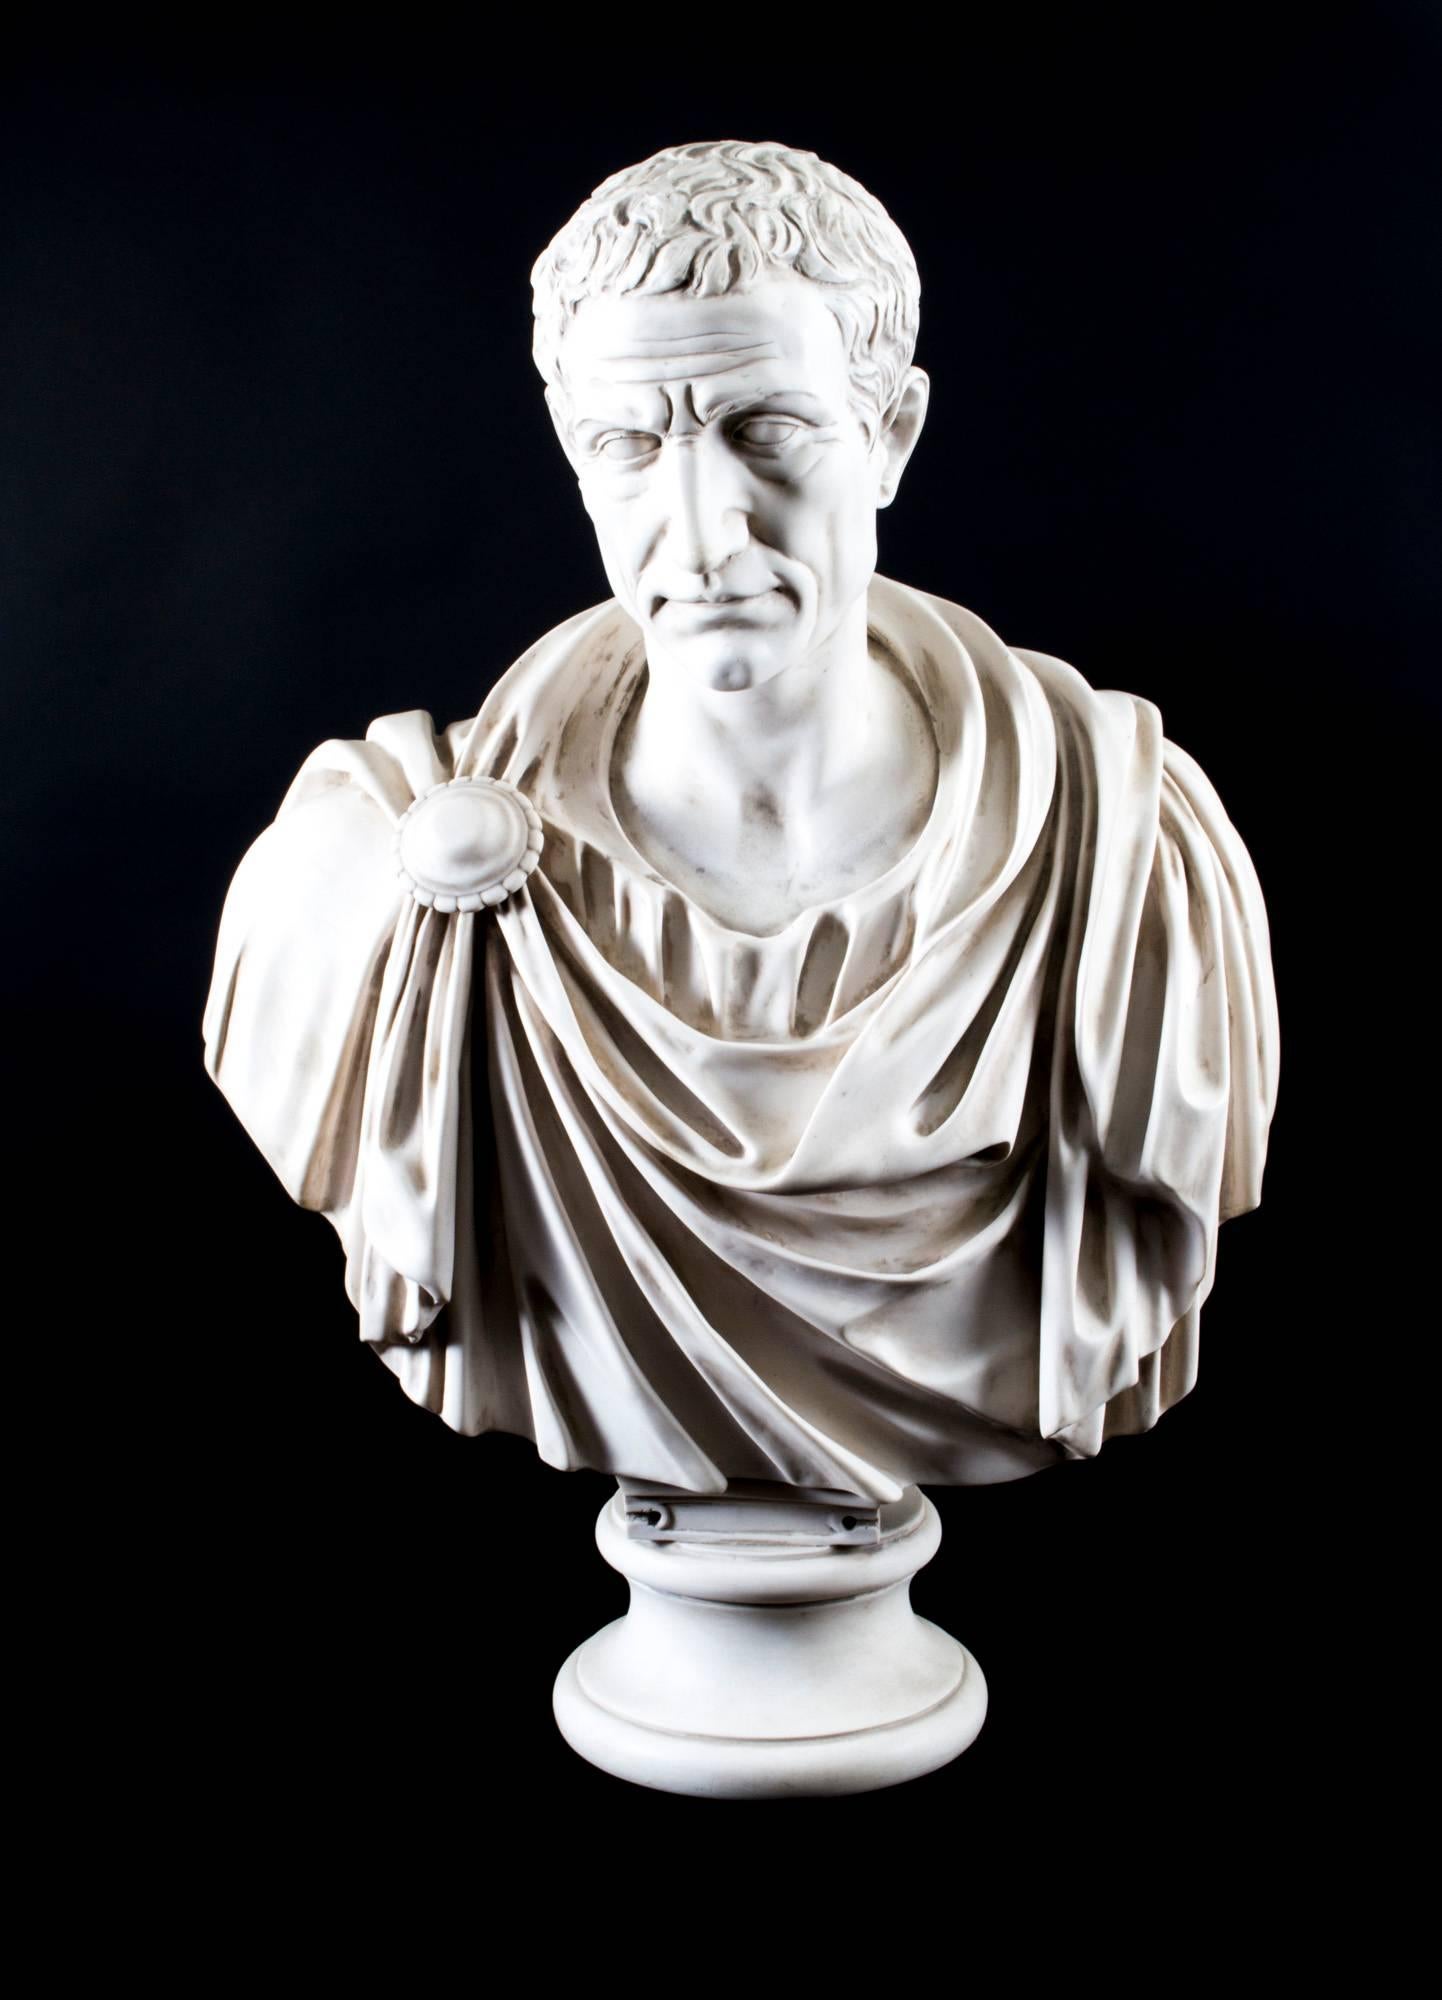 A beautifully sculpted marble bust of the famous Roman general Lucius Junius Brutus dating from the last quarter of the 20th century.

He is wearing a flowing toga with a fibulae or broach holding it in place, on a matching elegant pedestal in the